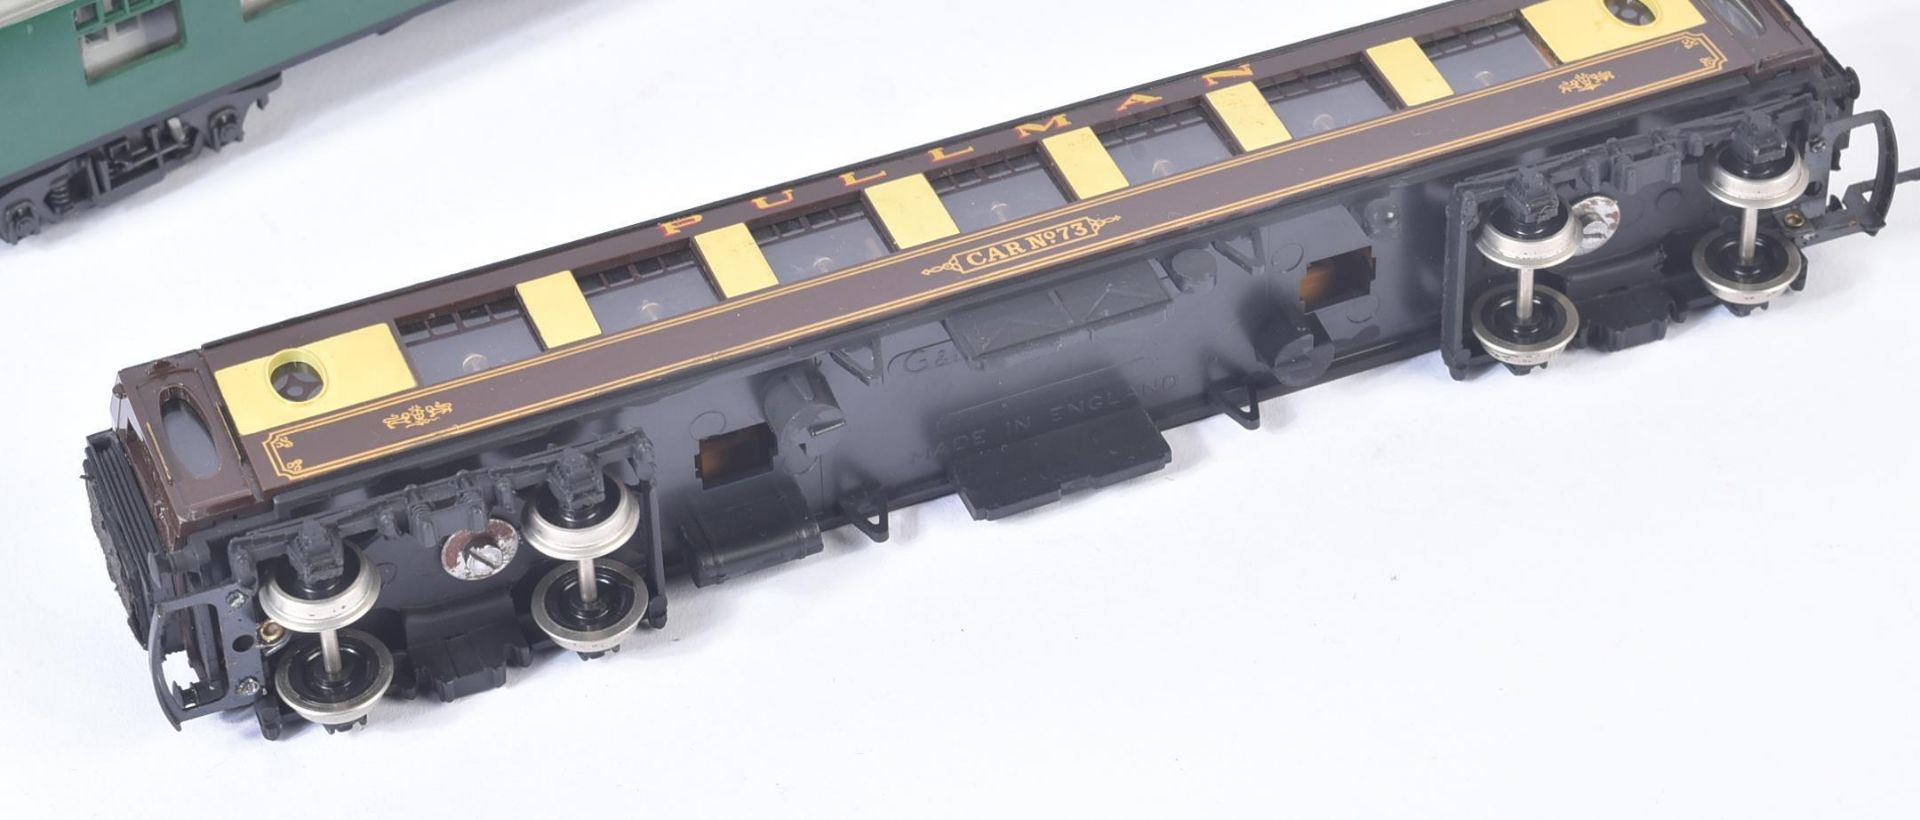 COLLECTION OF ASSORTED OO GAUGE MODEL RAILWAY CARRIAGES - Image 6 of 6